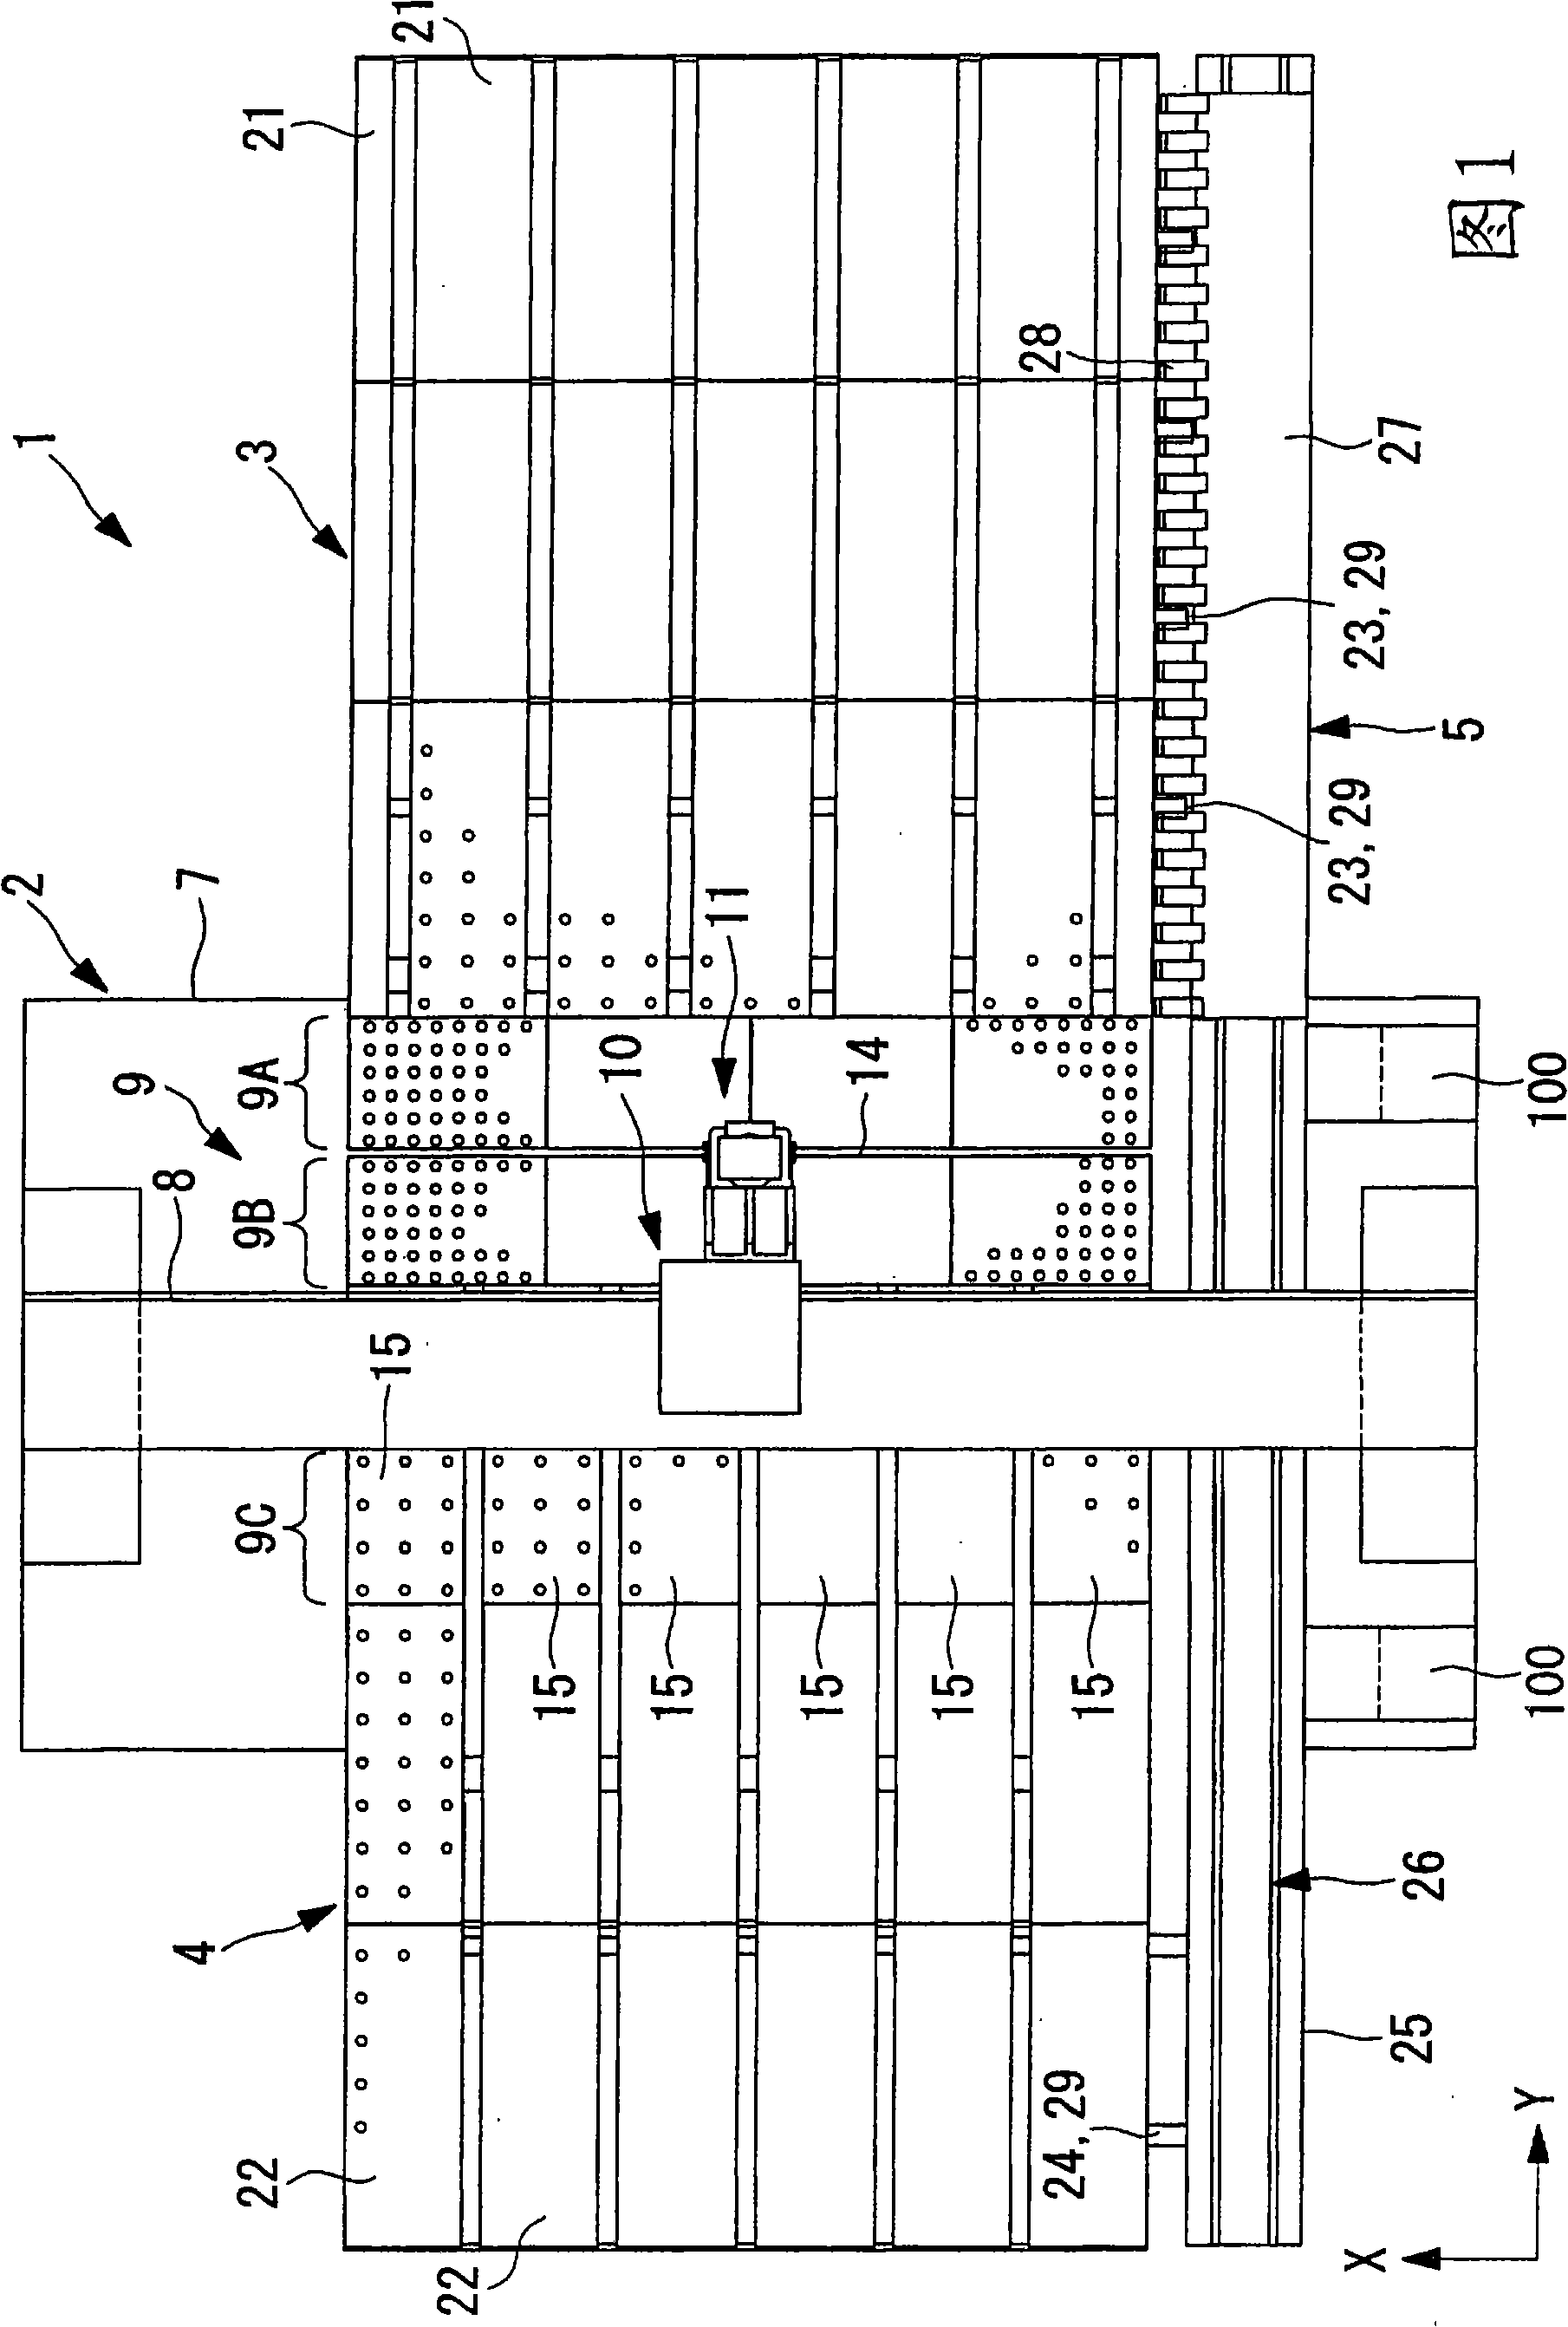 Substrate inspecting apparatus